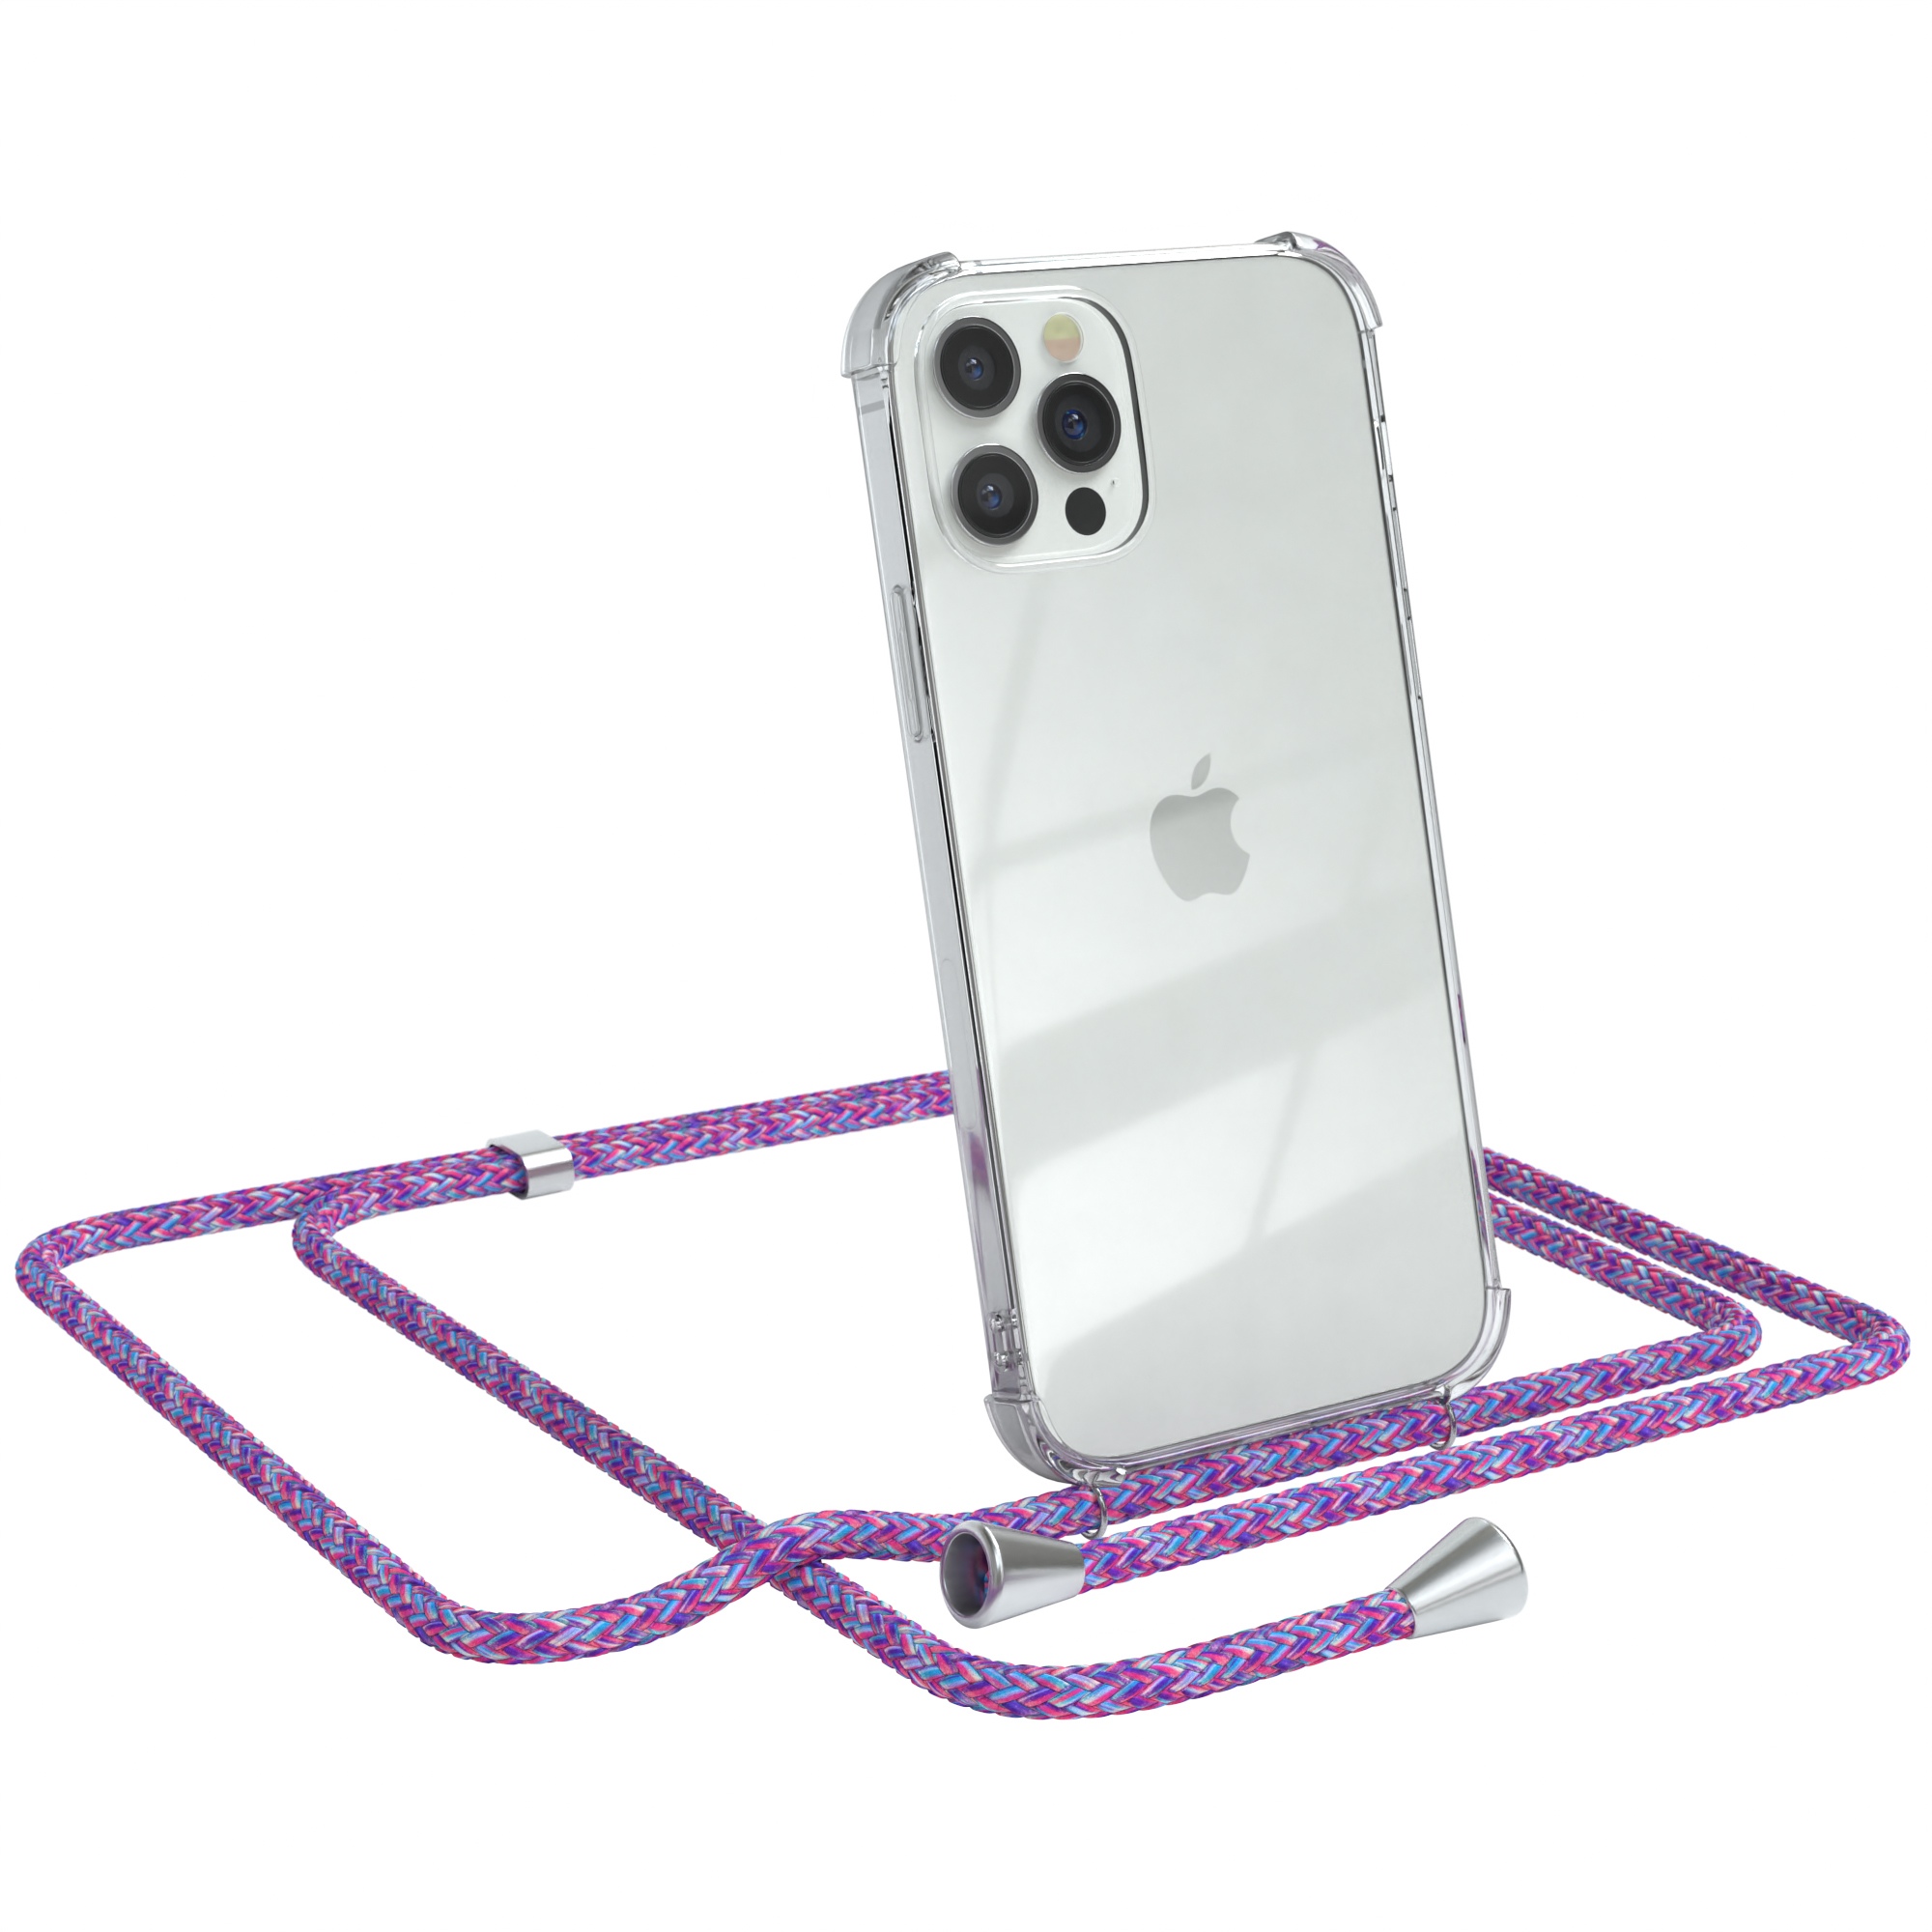 EAZY CASE Clear Cover mit 12 Pro, / Umhängeband, / iPhone Umhängetasche, Silber Clips Apple, 12 Lila